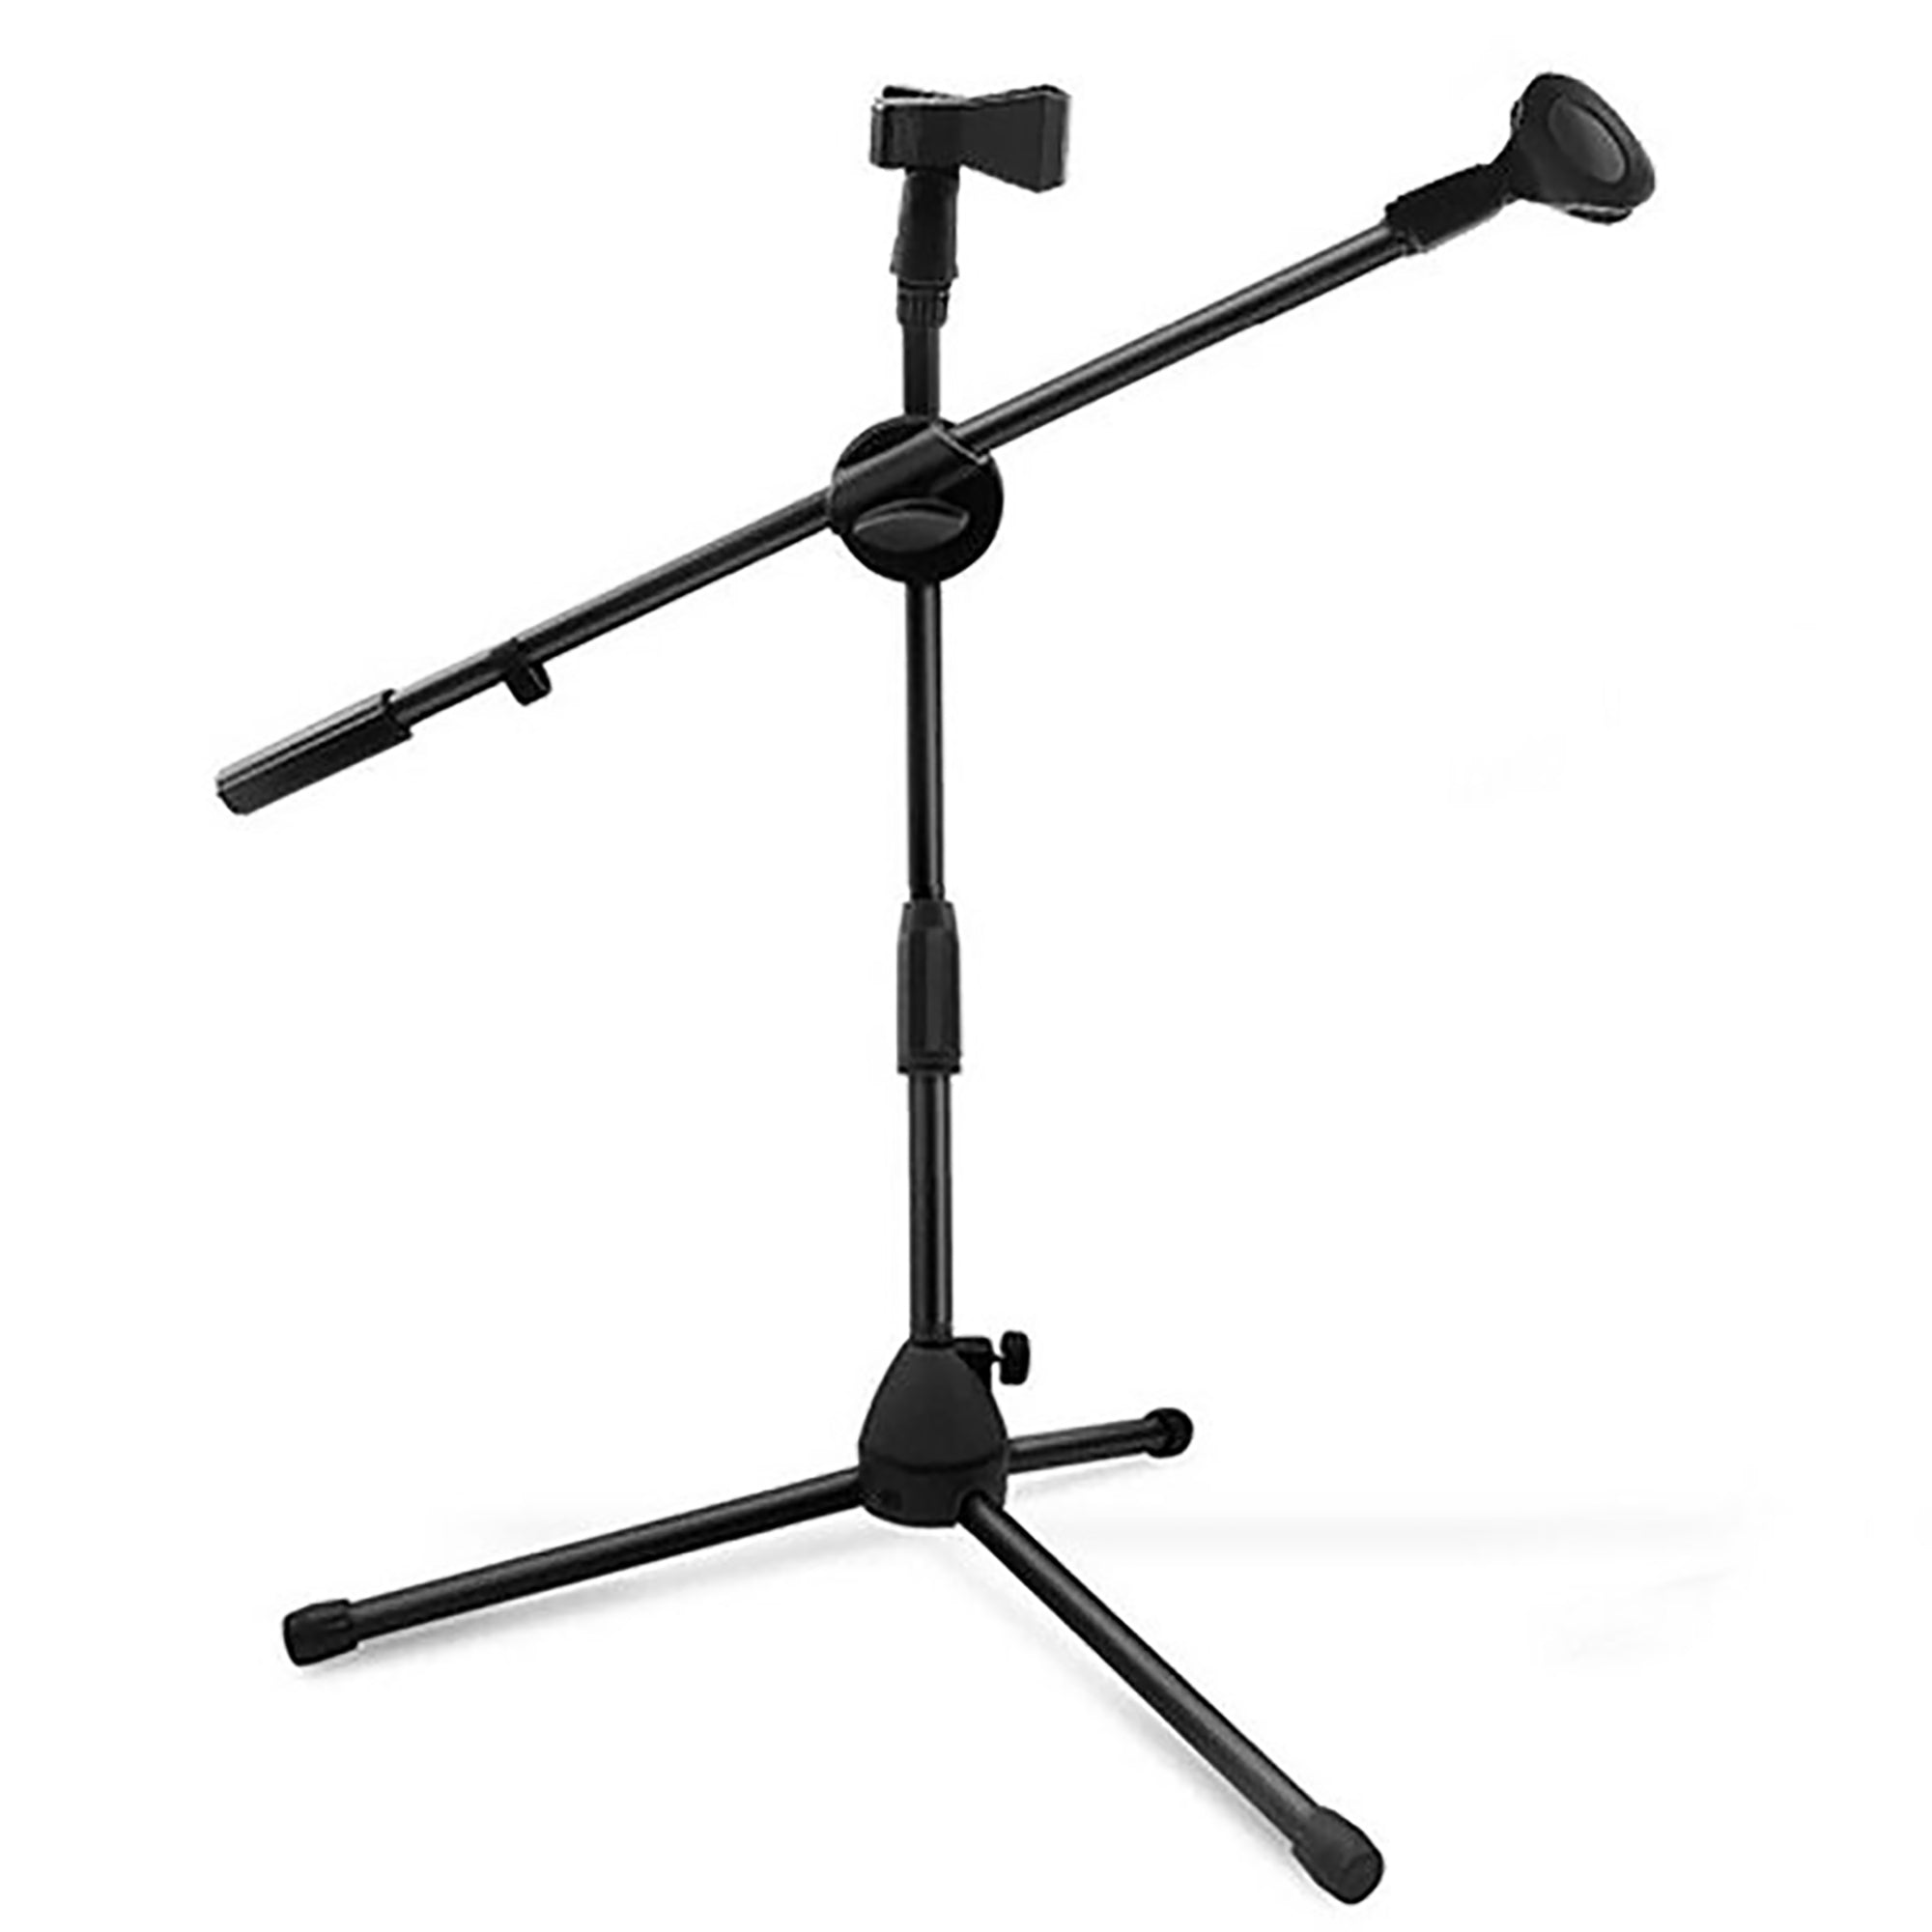 5 Core Dual Microphone Combo with Tripod Stand Boom Arm Two Dynamic Cardioid Mic Includes Two Mic Clips XLR Cables - MS DBL S +ND58 +ND57